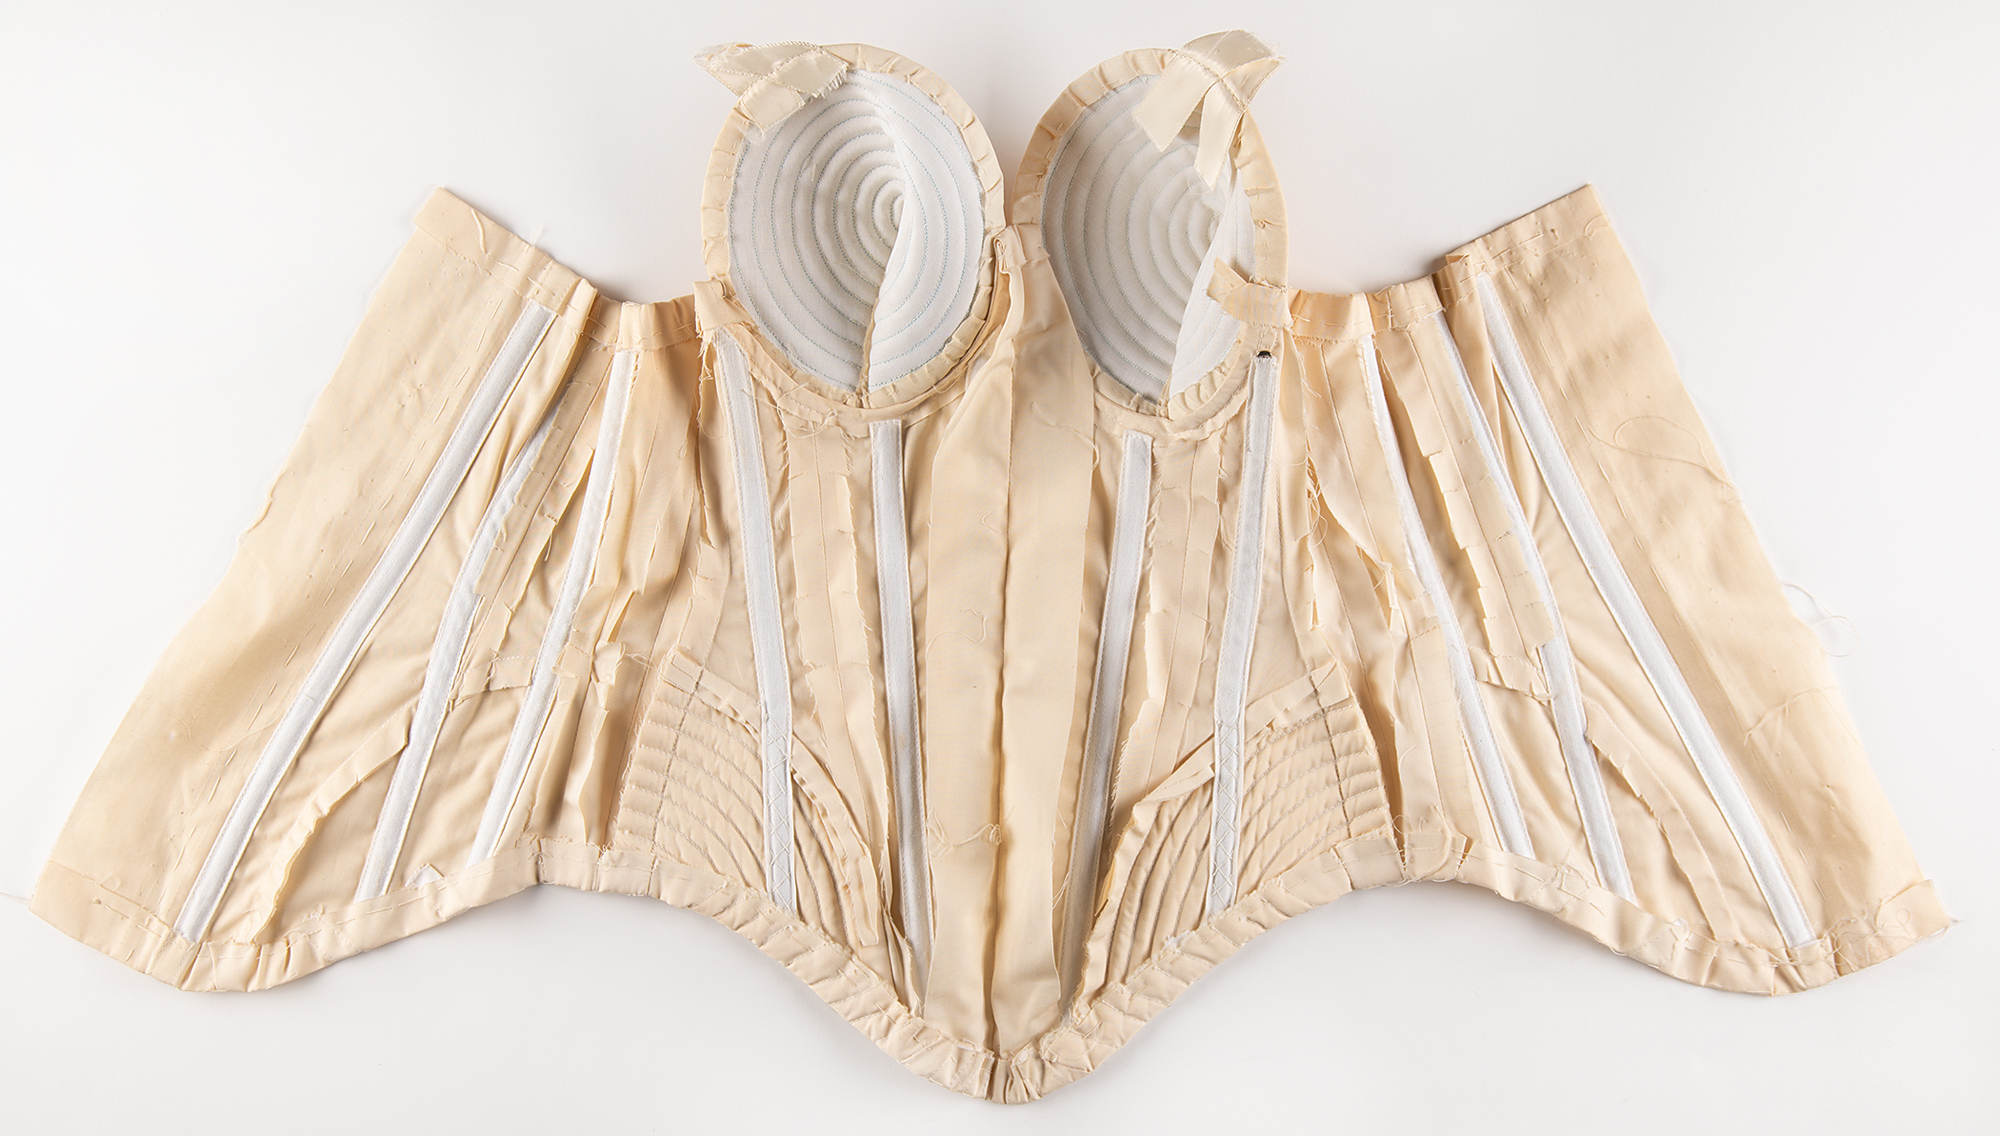 Madonna's corset bra expected to fetch £15,000 at auction